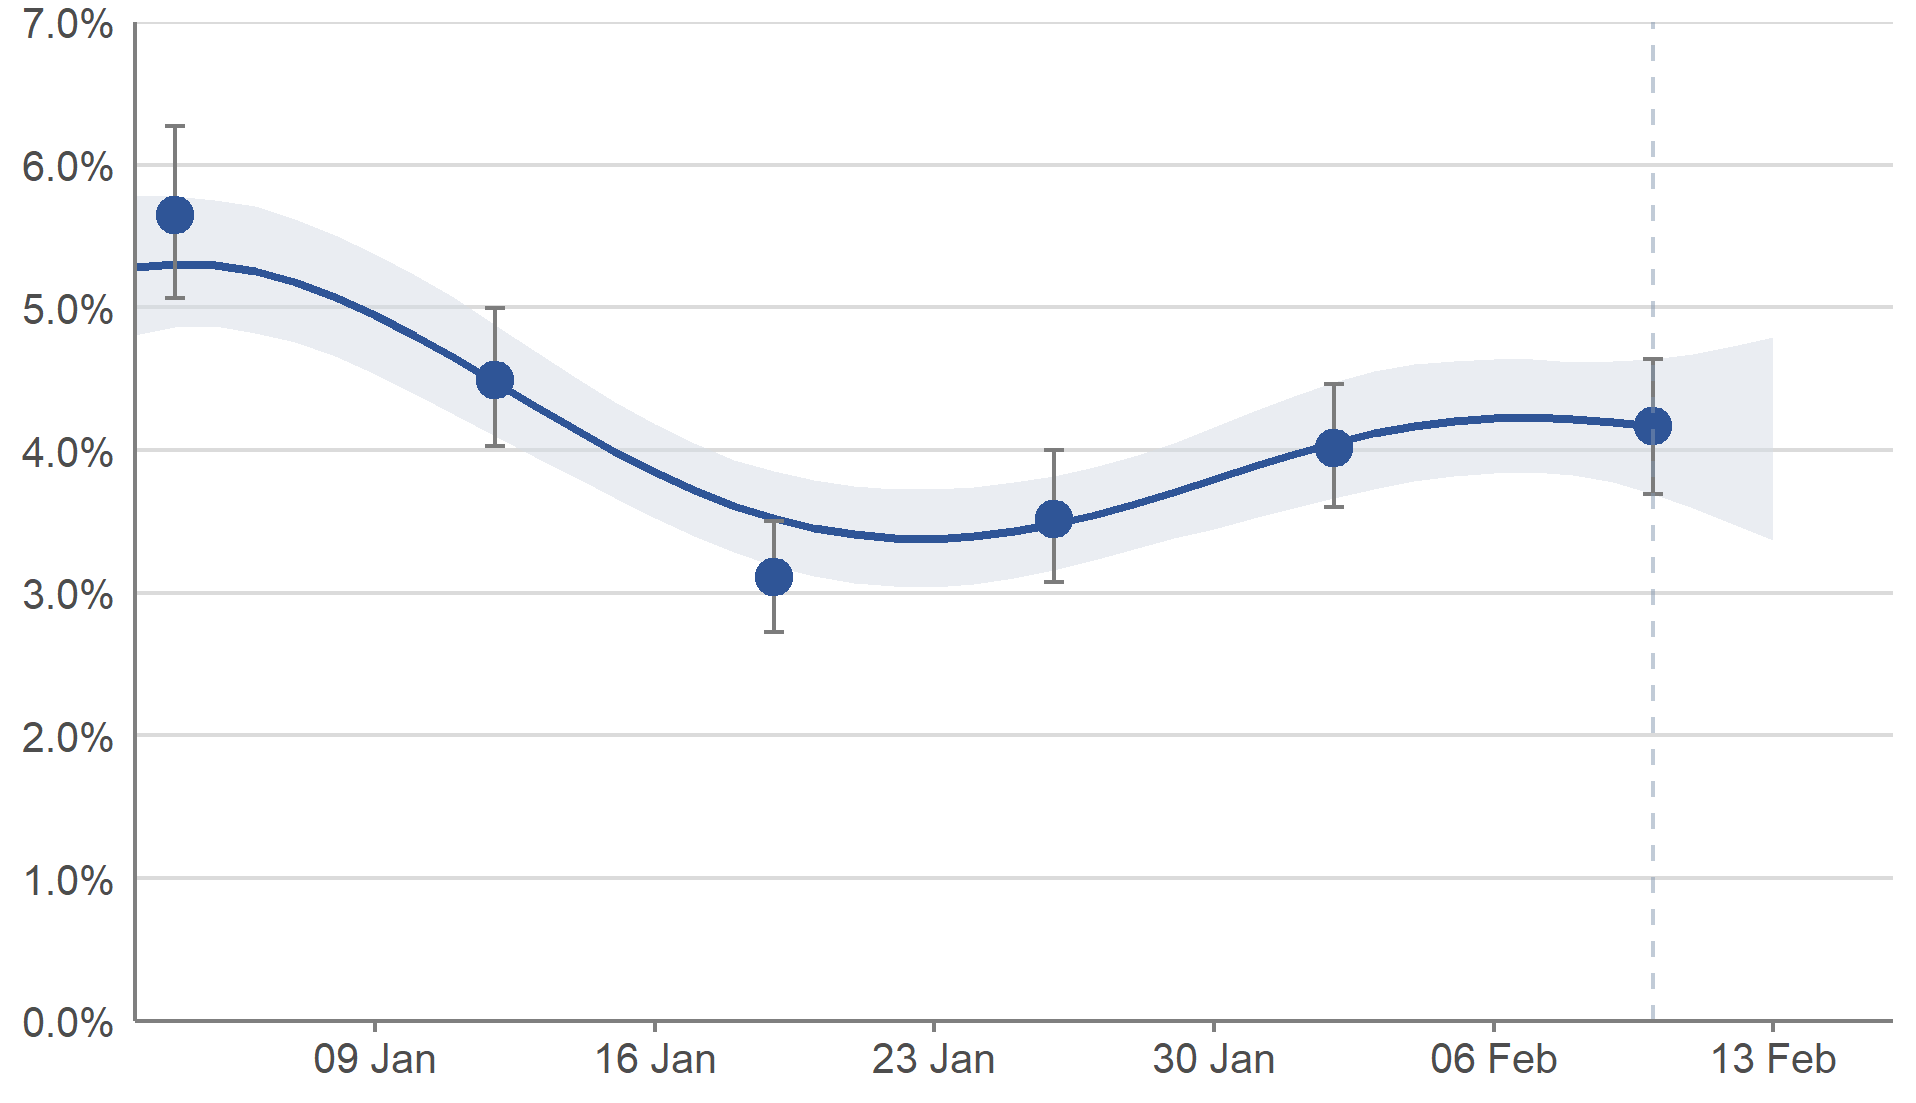 In Scotland, the estimated percentage of people testing positive for COVID-19 peaked on 3 January 2022. After a period of decrease, the estimates increased in the two weeks up to 13 February 2022, but the trend was uncertain in the most recent week.